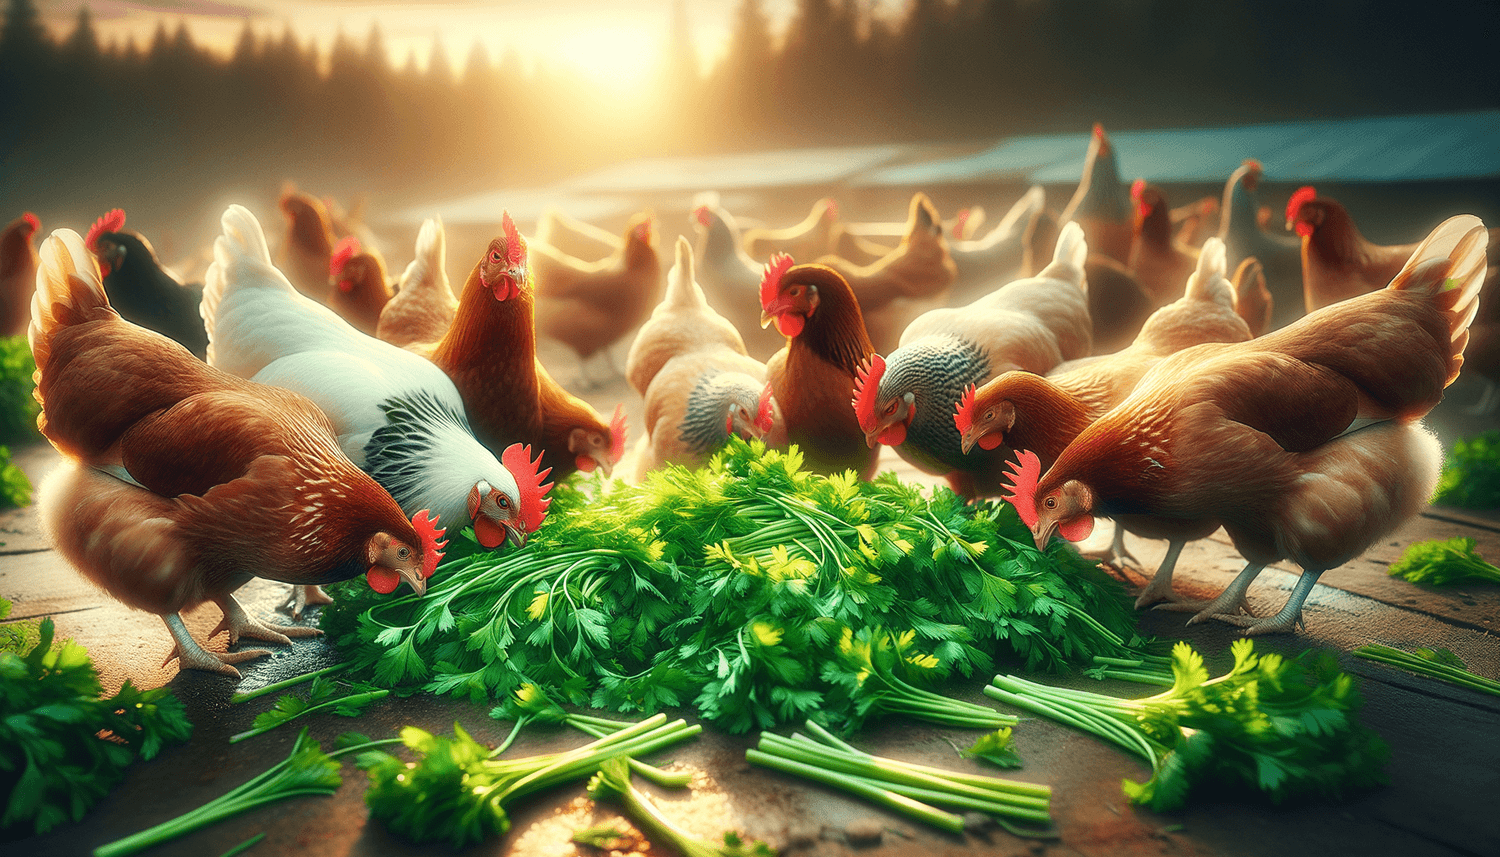 Can Chickens Eat Parsley Stems?